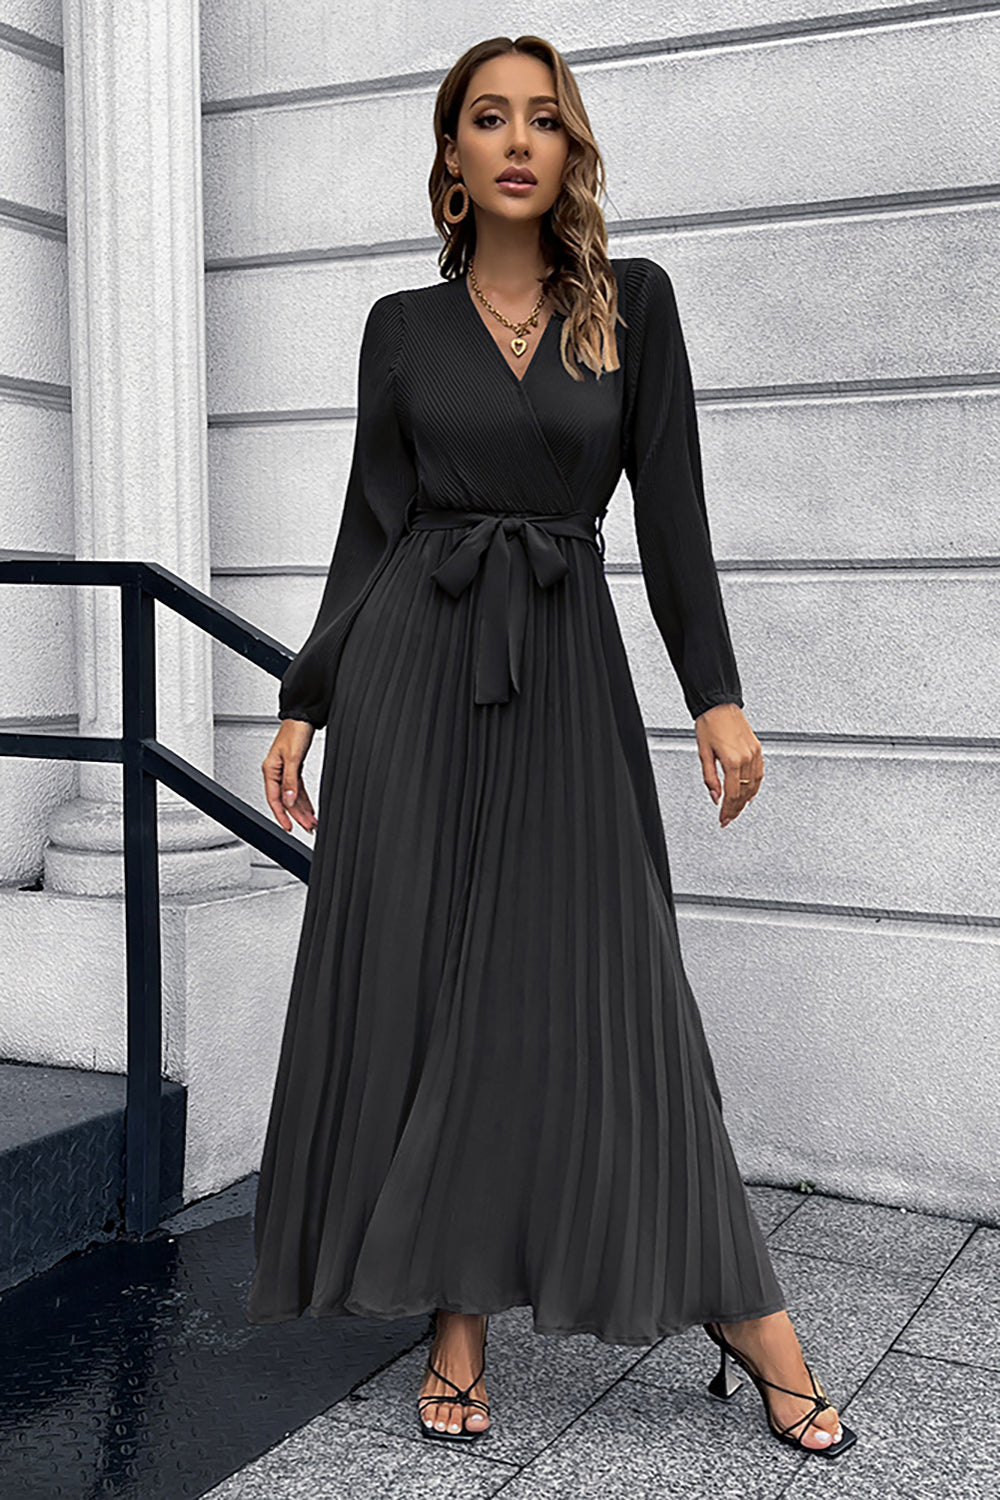 Long Sleeves Black Casual Dress with Sash